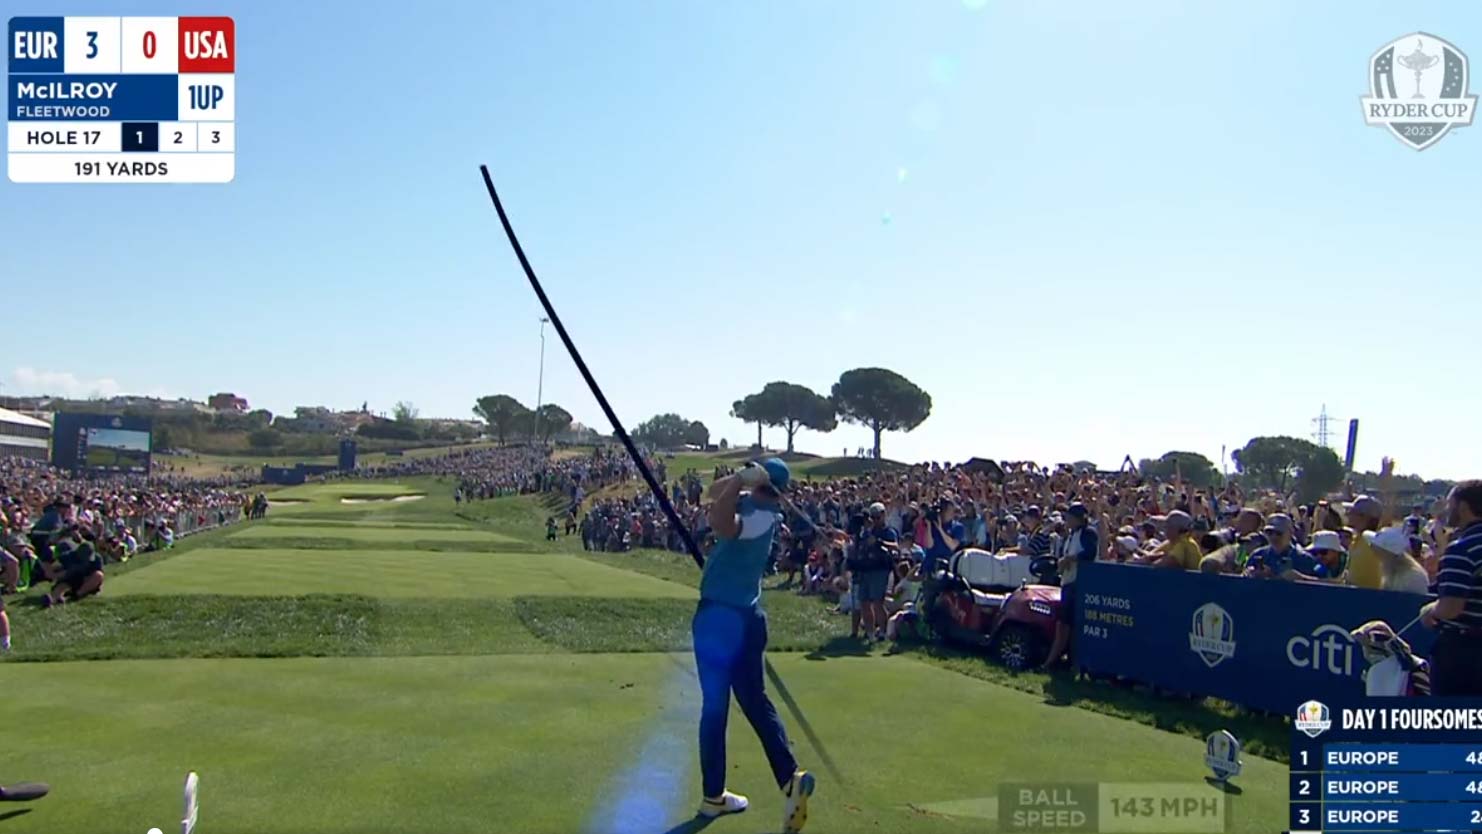 Rory McIlroy hits a clutch tee shot at the par-3 17th hole Friday morning at the 2023 Ryder Cup